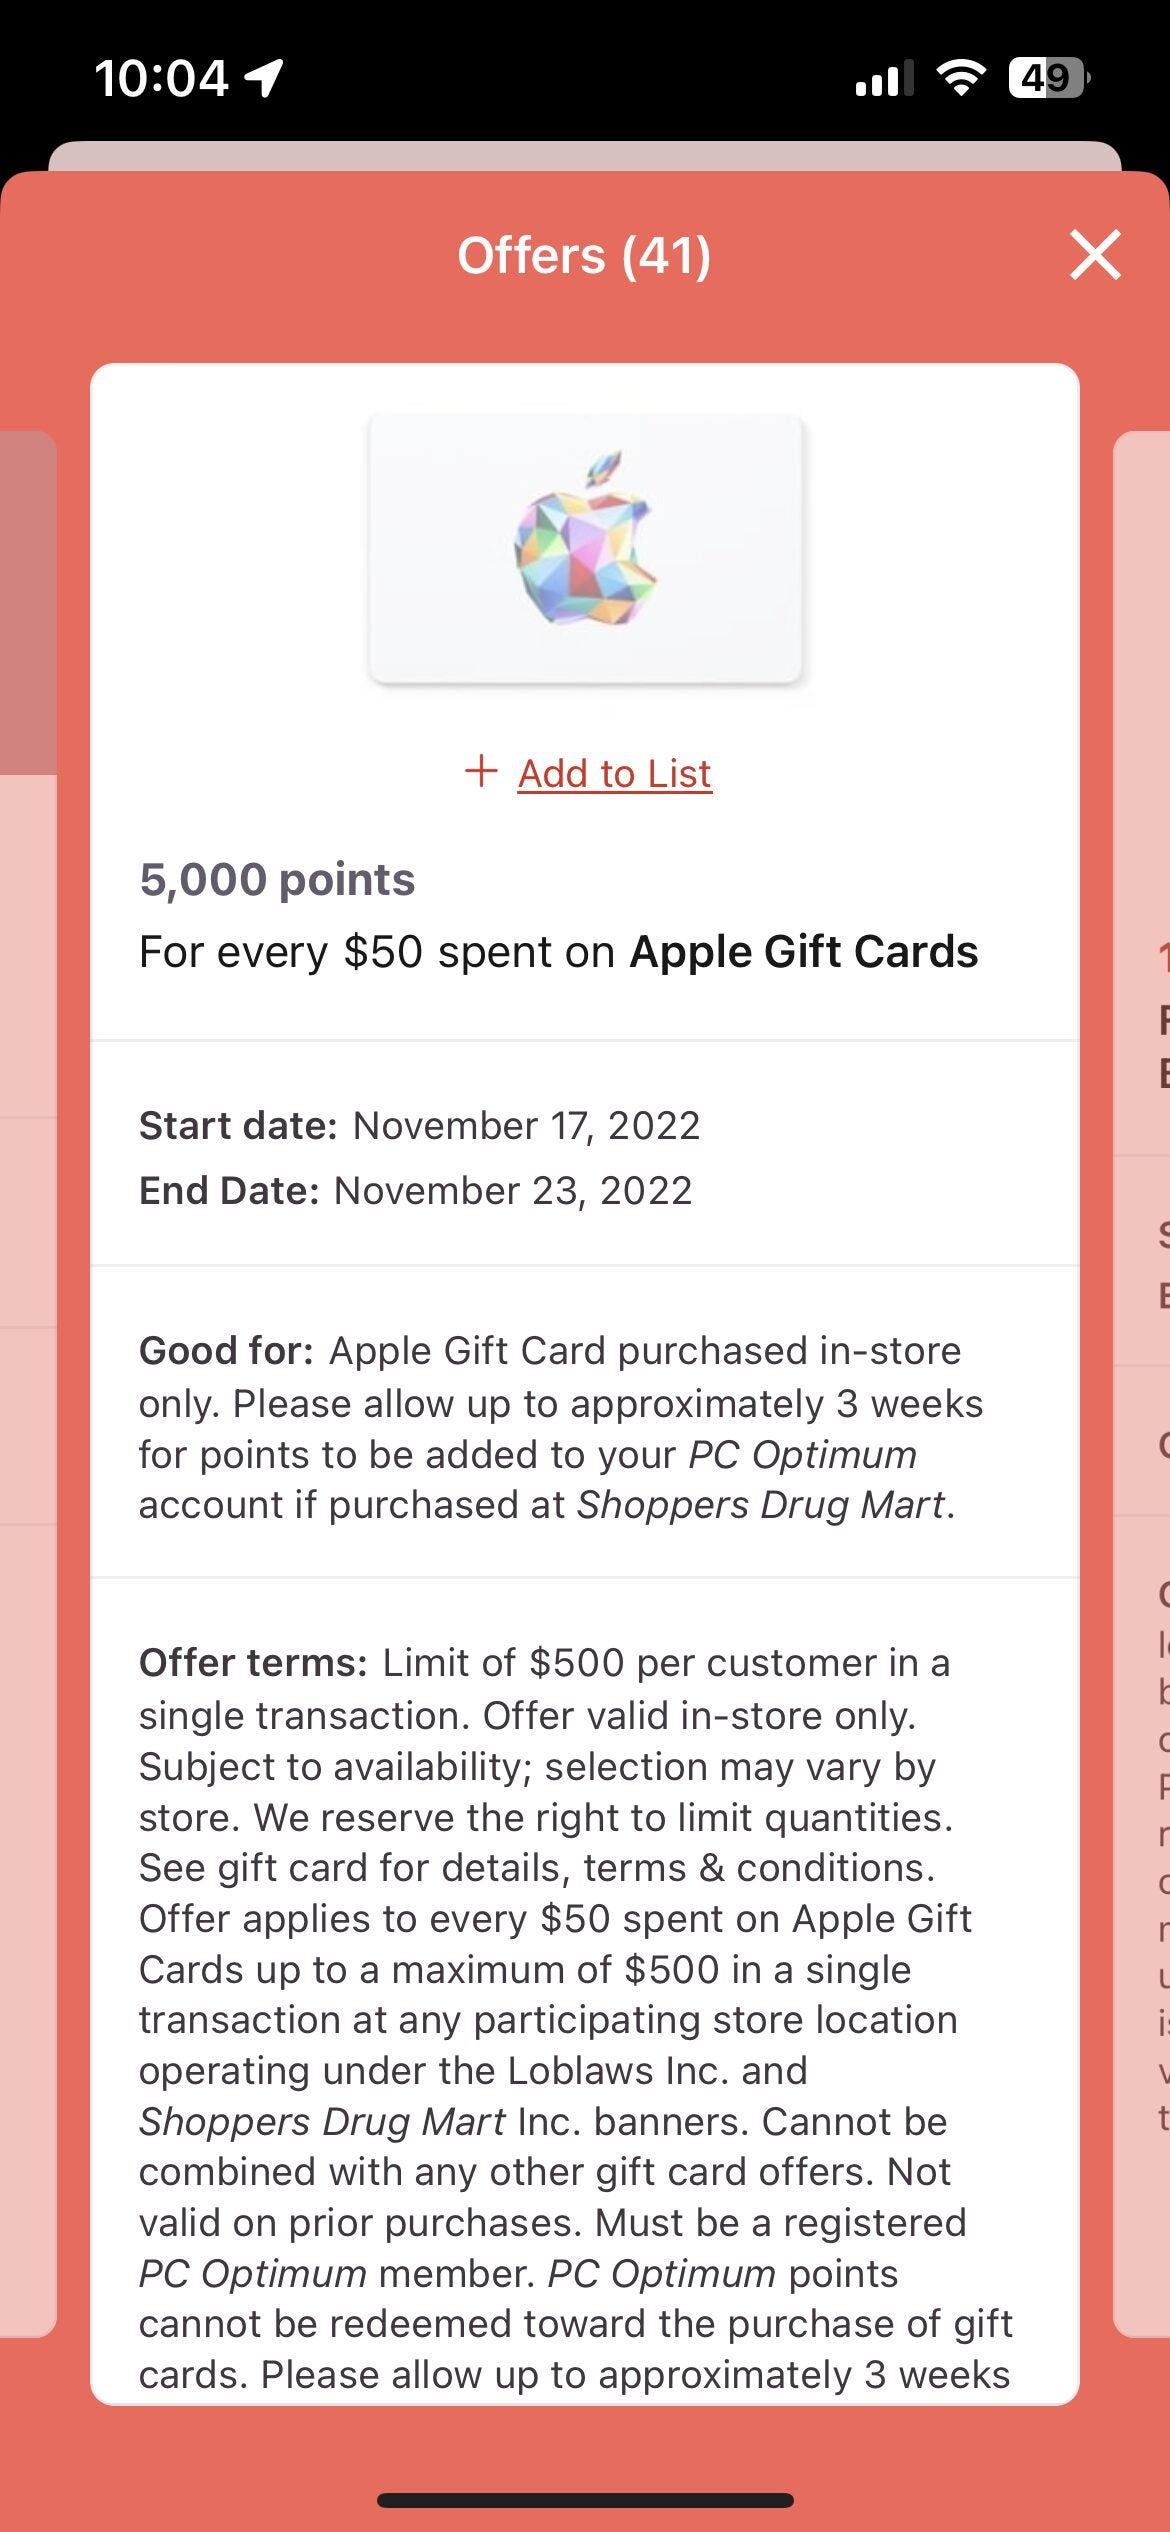 Apple Gift Card Deal: Get 5,000 PC Optimum Points with Every $50 Purchase •  iPhone in Canada Blog